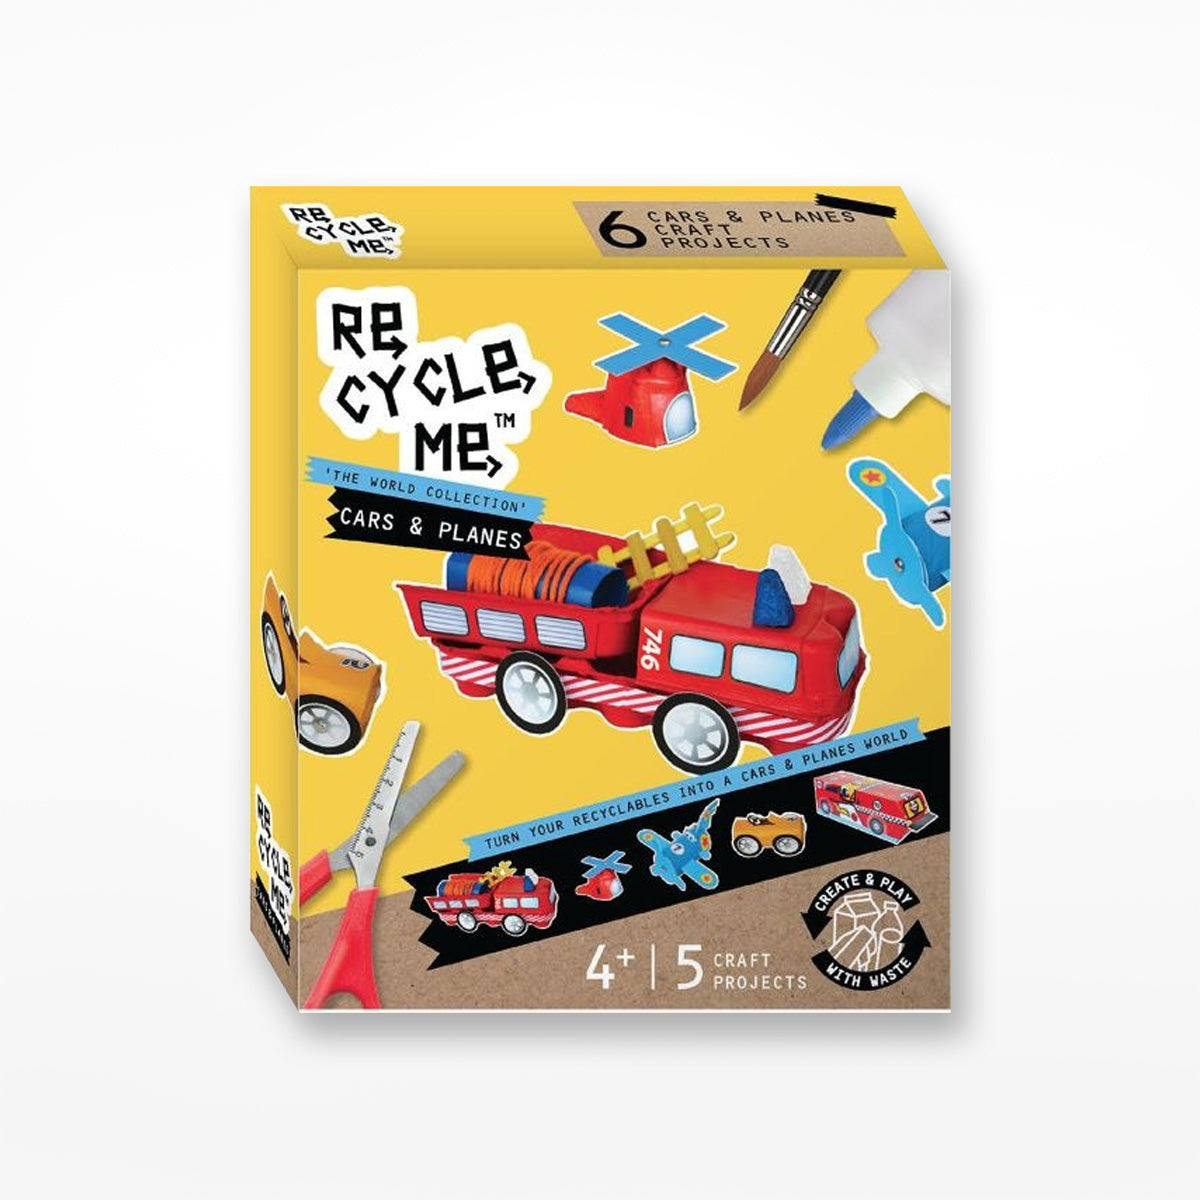 Re-cycle Me Cars & Planes Kit